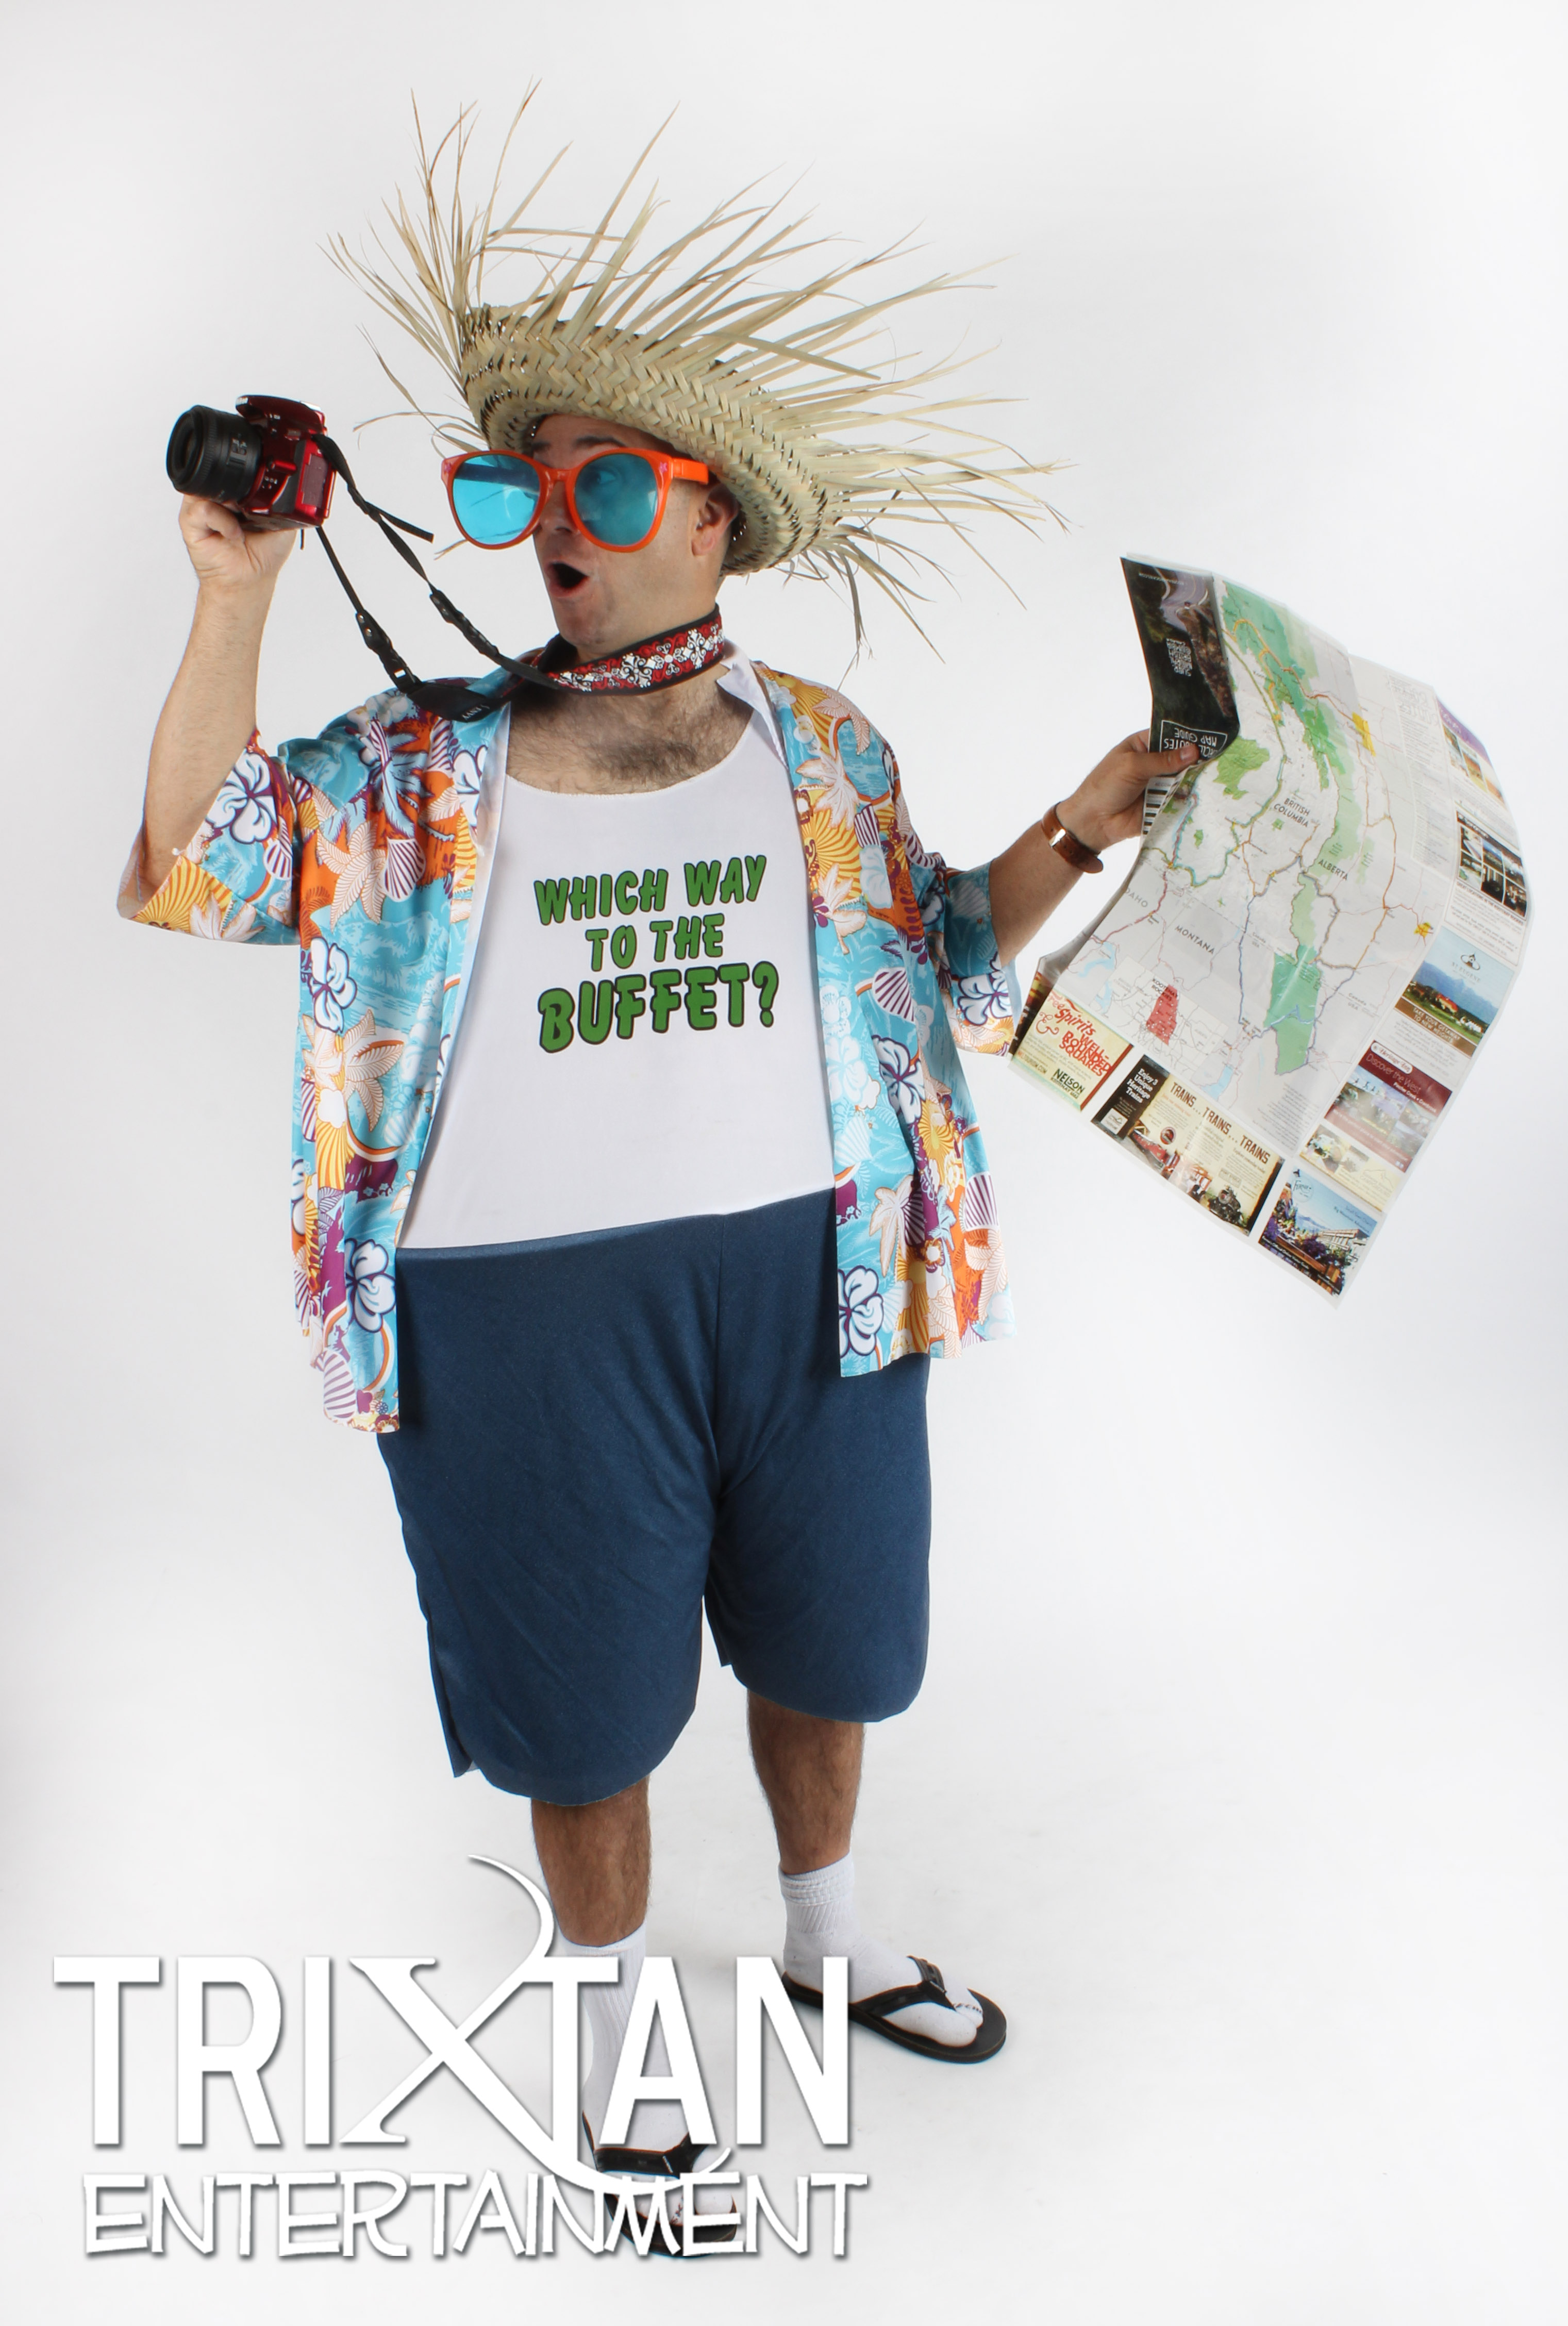 what does tacky tourist mean in spanish